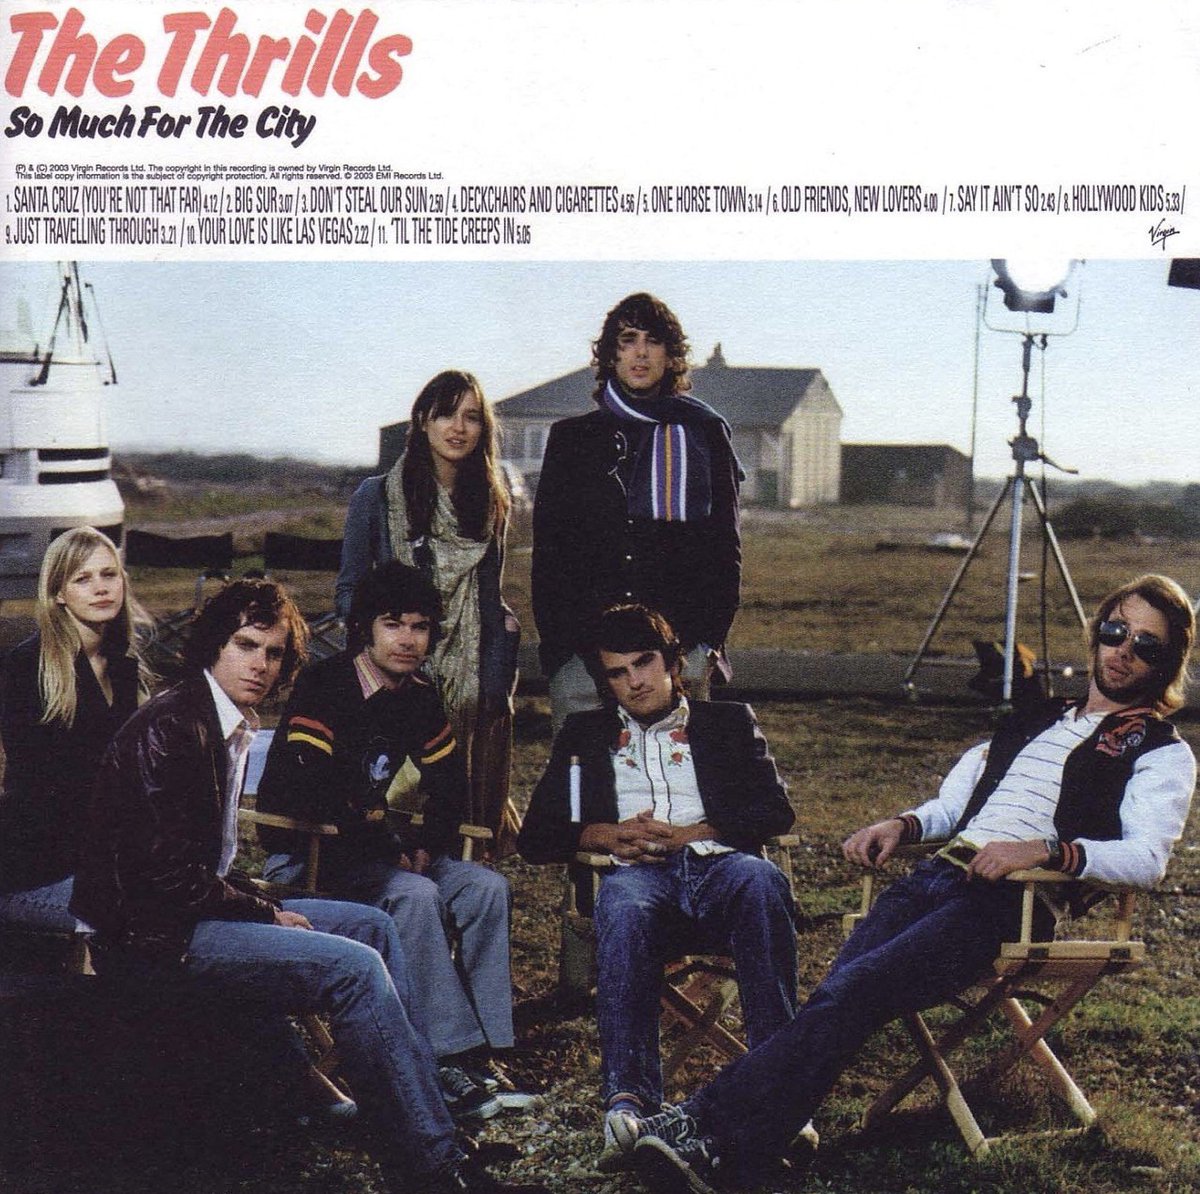 #albumsyoumusthear The Thrills - So Much for the City - 2003